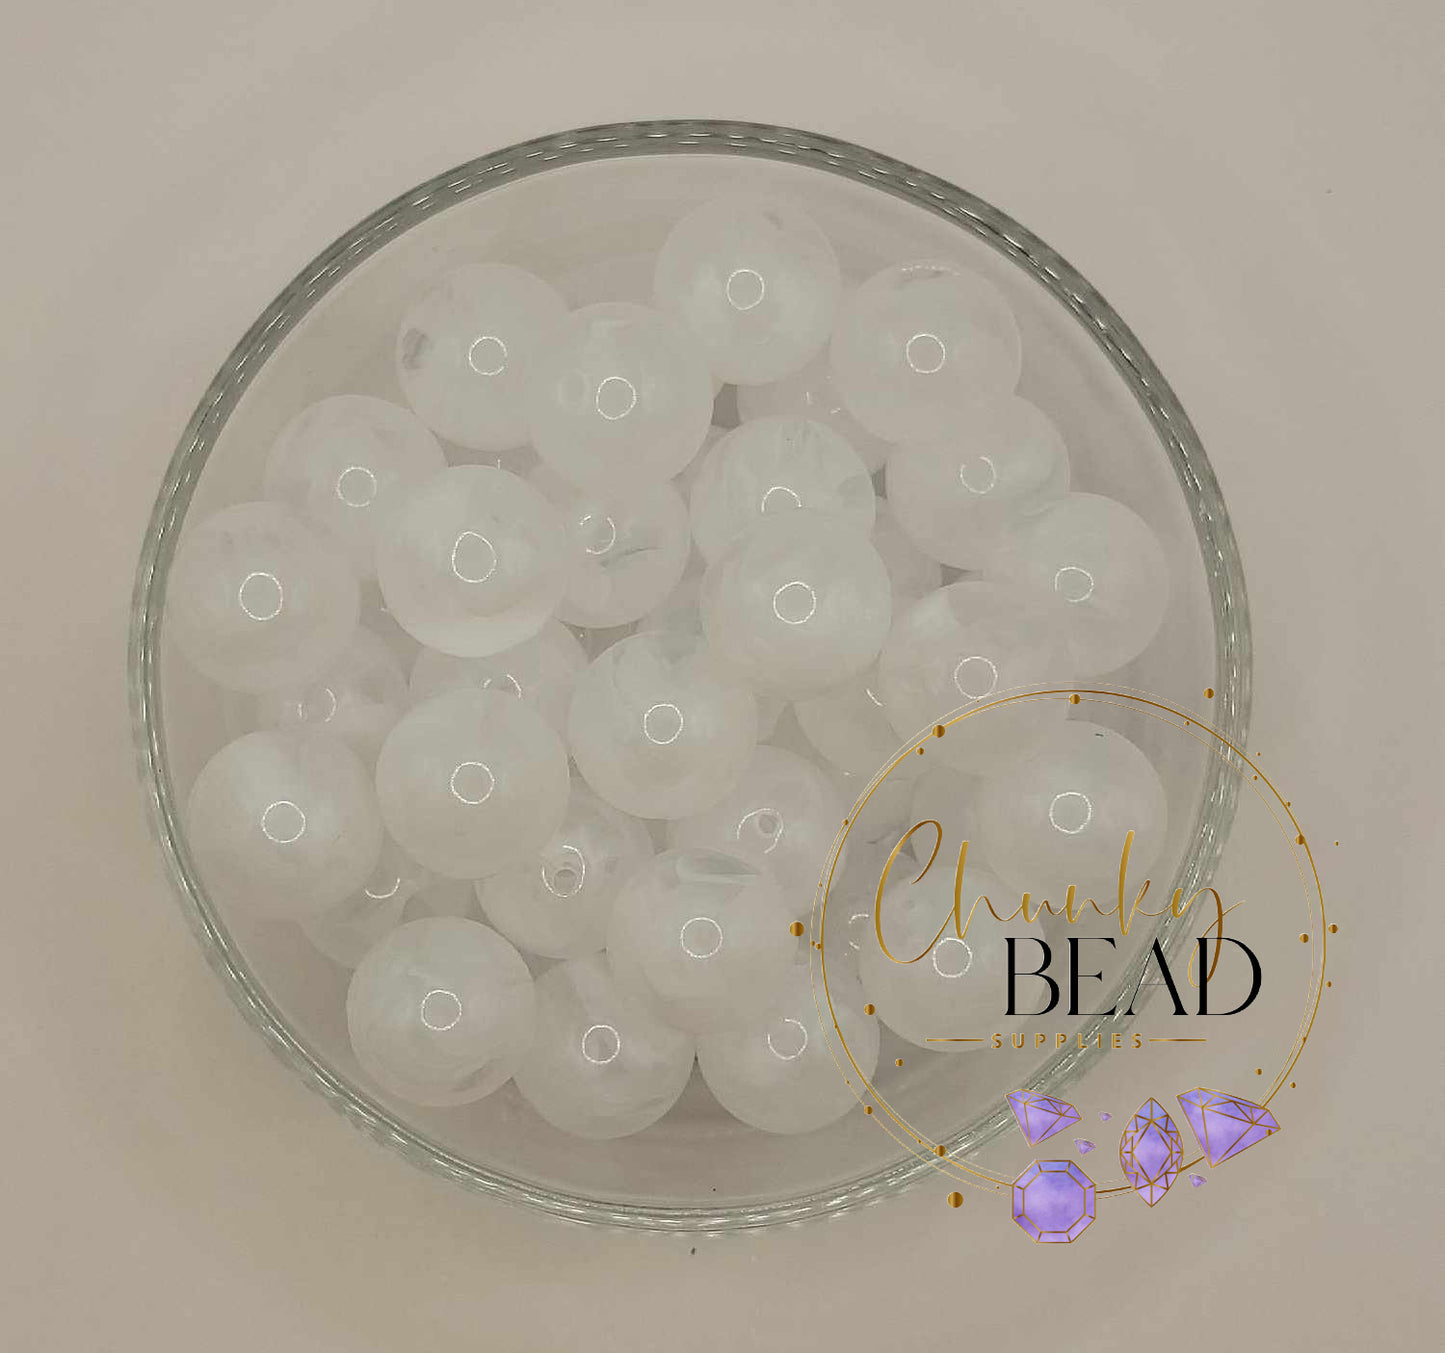 20mm “Clear White ” Double Color Acrylic Beads